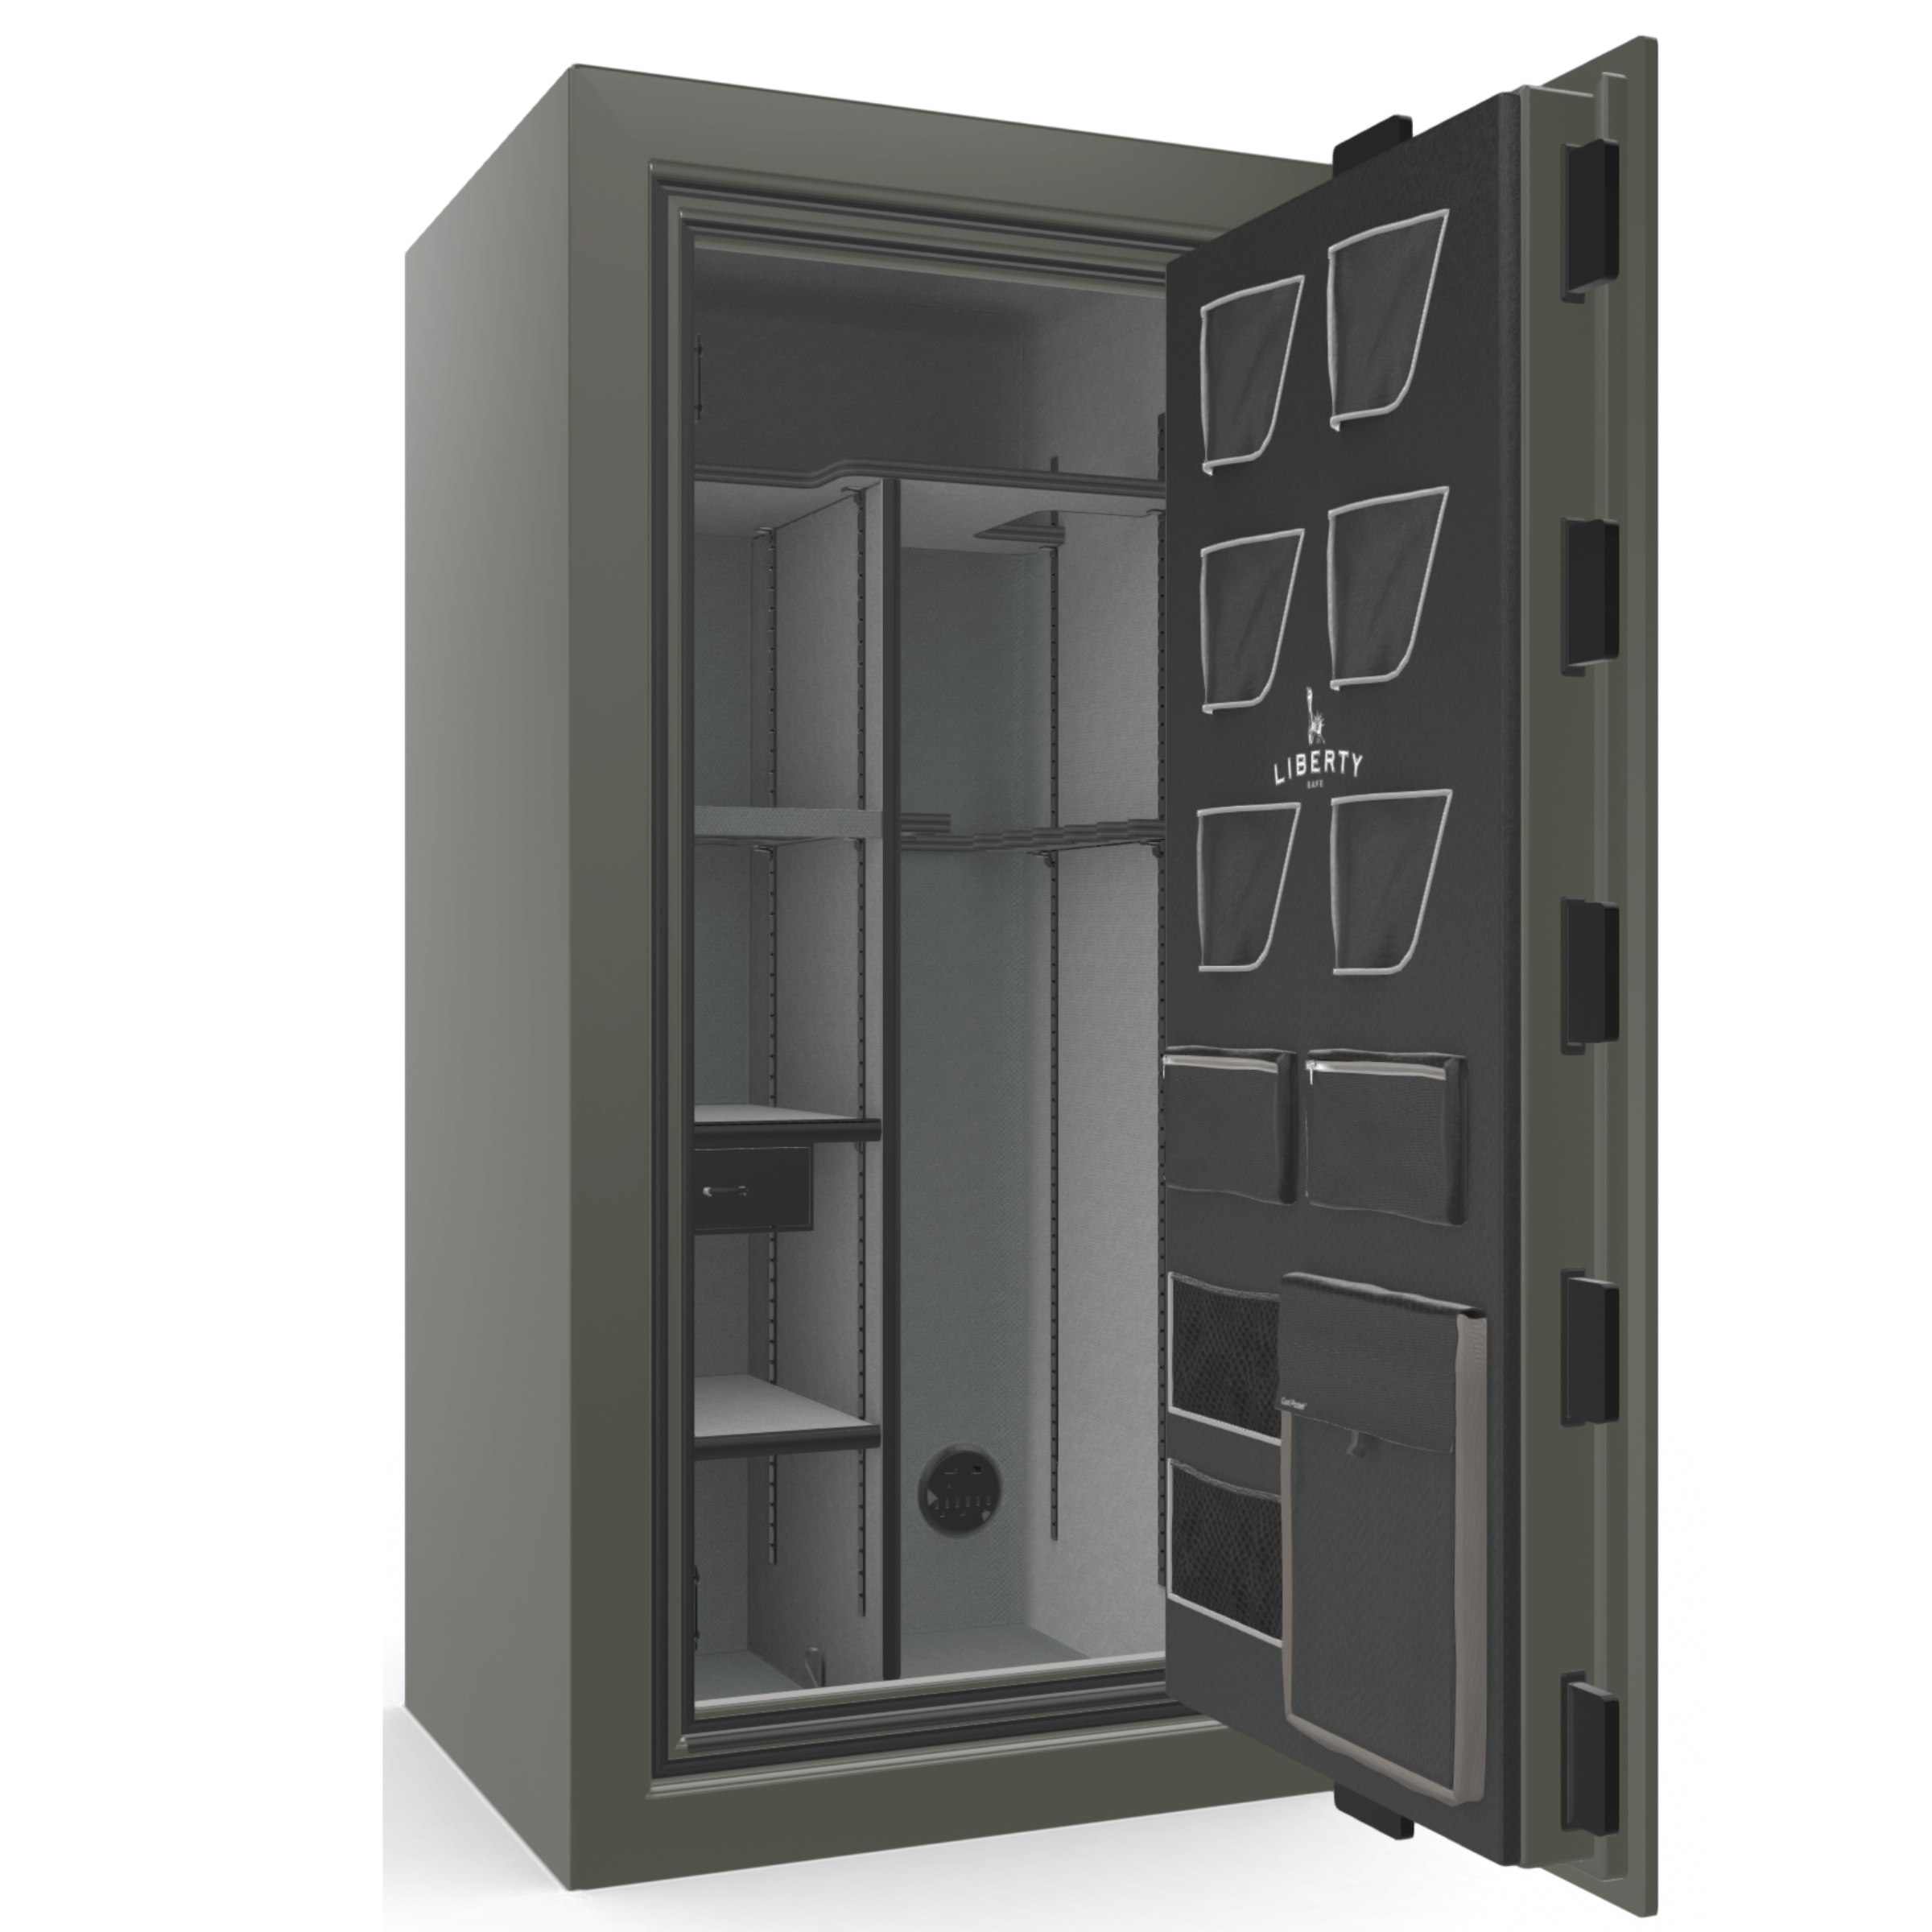 Classic Plus Series | Level 7 Security | 110 Minute Fire Protection | 40 | DIMENSIONS: 66.5"(H) X 36"(W) X 32"(D) | Champagne 2 Tone | Electronic Lock, photo 24